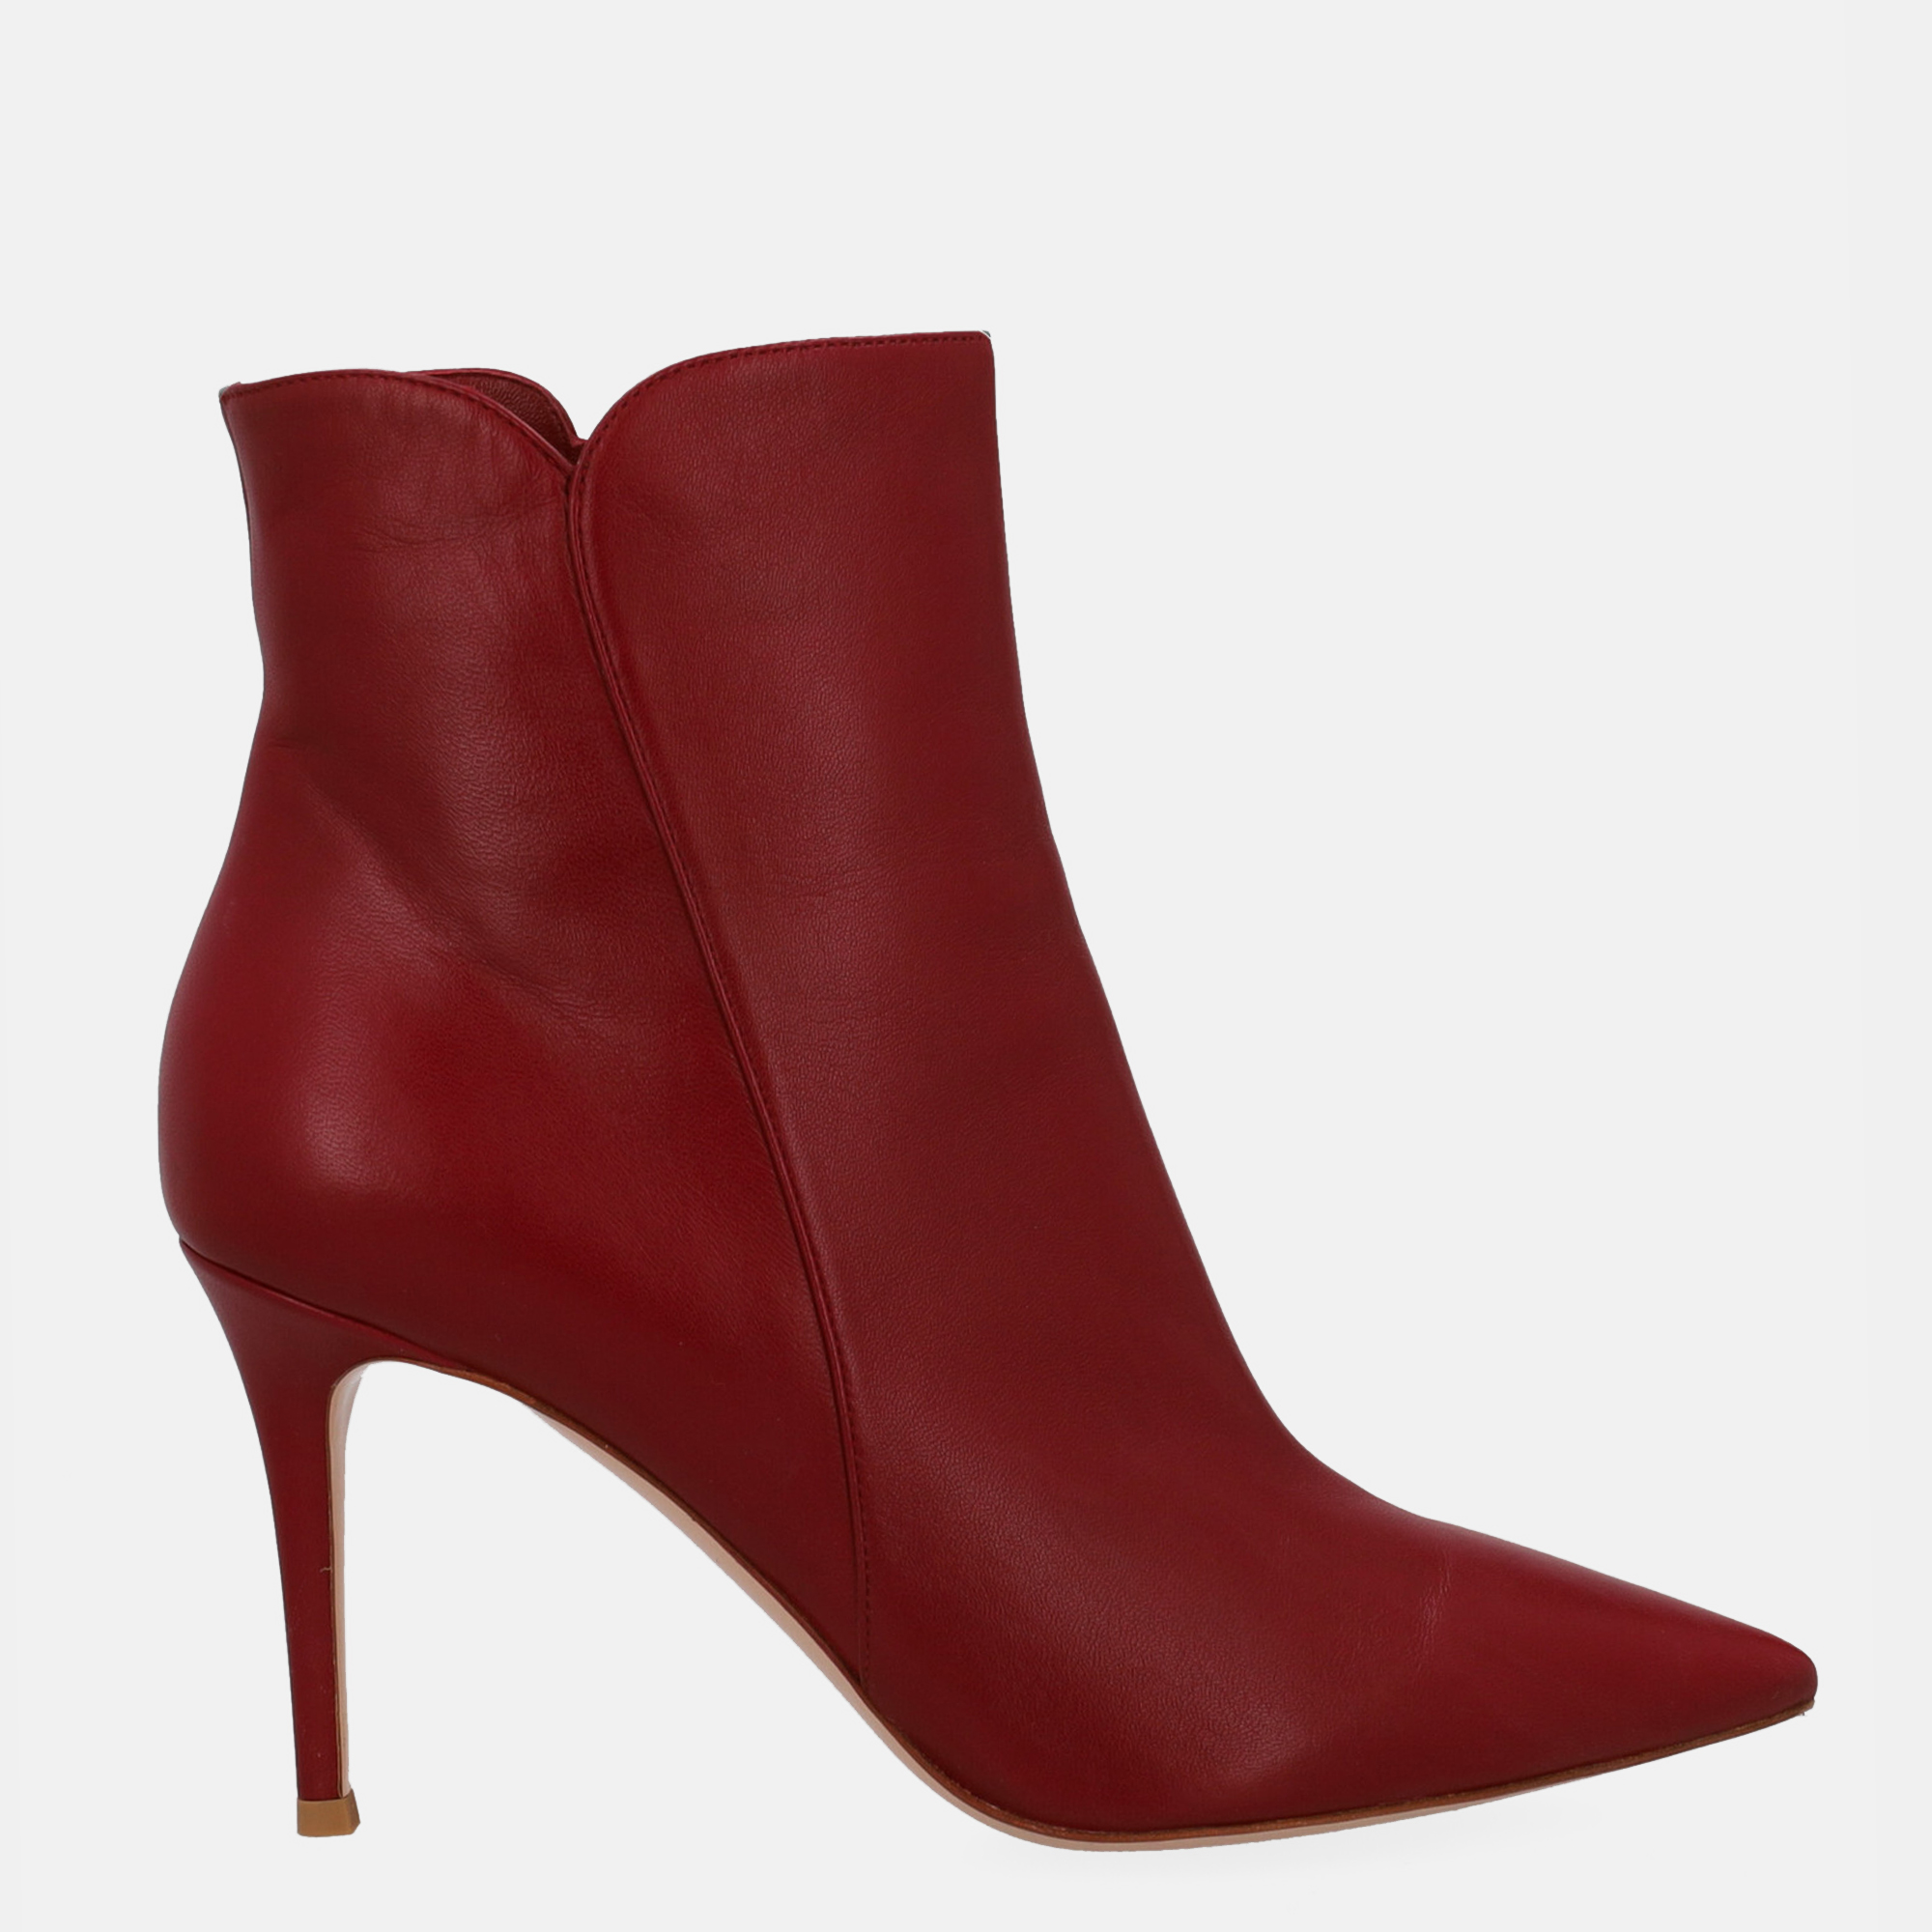 Gianvito Rossi  Women's Leather Ankle Boots - Burgundy - EU 40